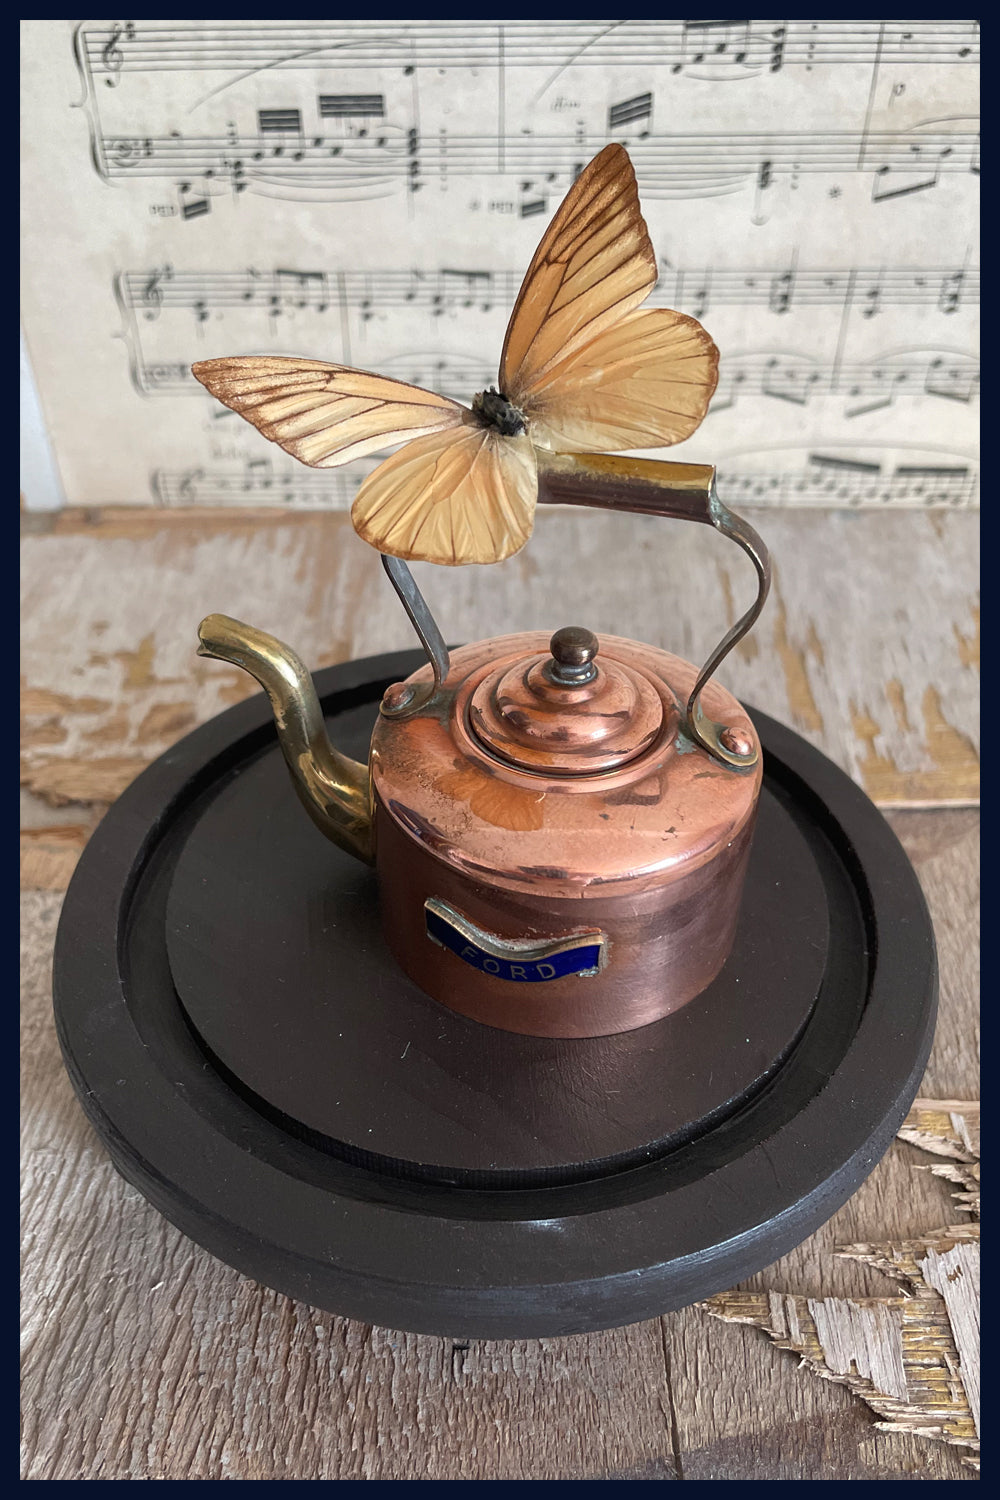 SOLD Enigma Variations Collection: Miniature Antique Copper& Brass Kettle with a Vintage Butterfly under a Glass Display Dome